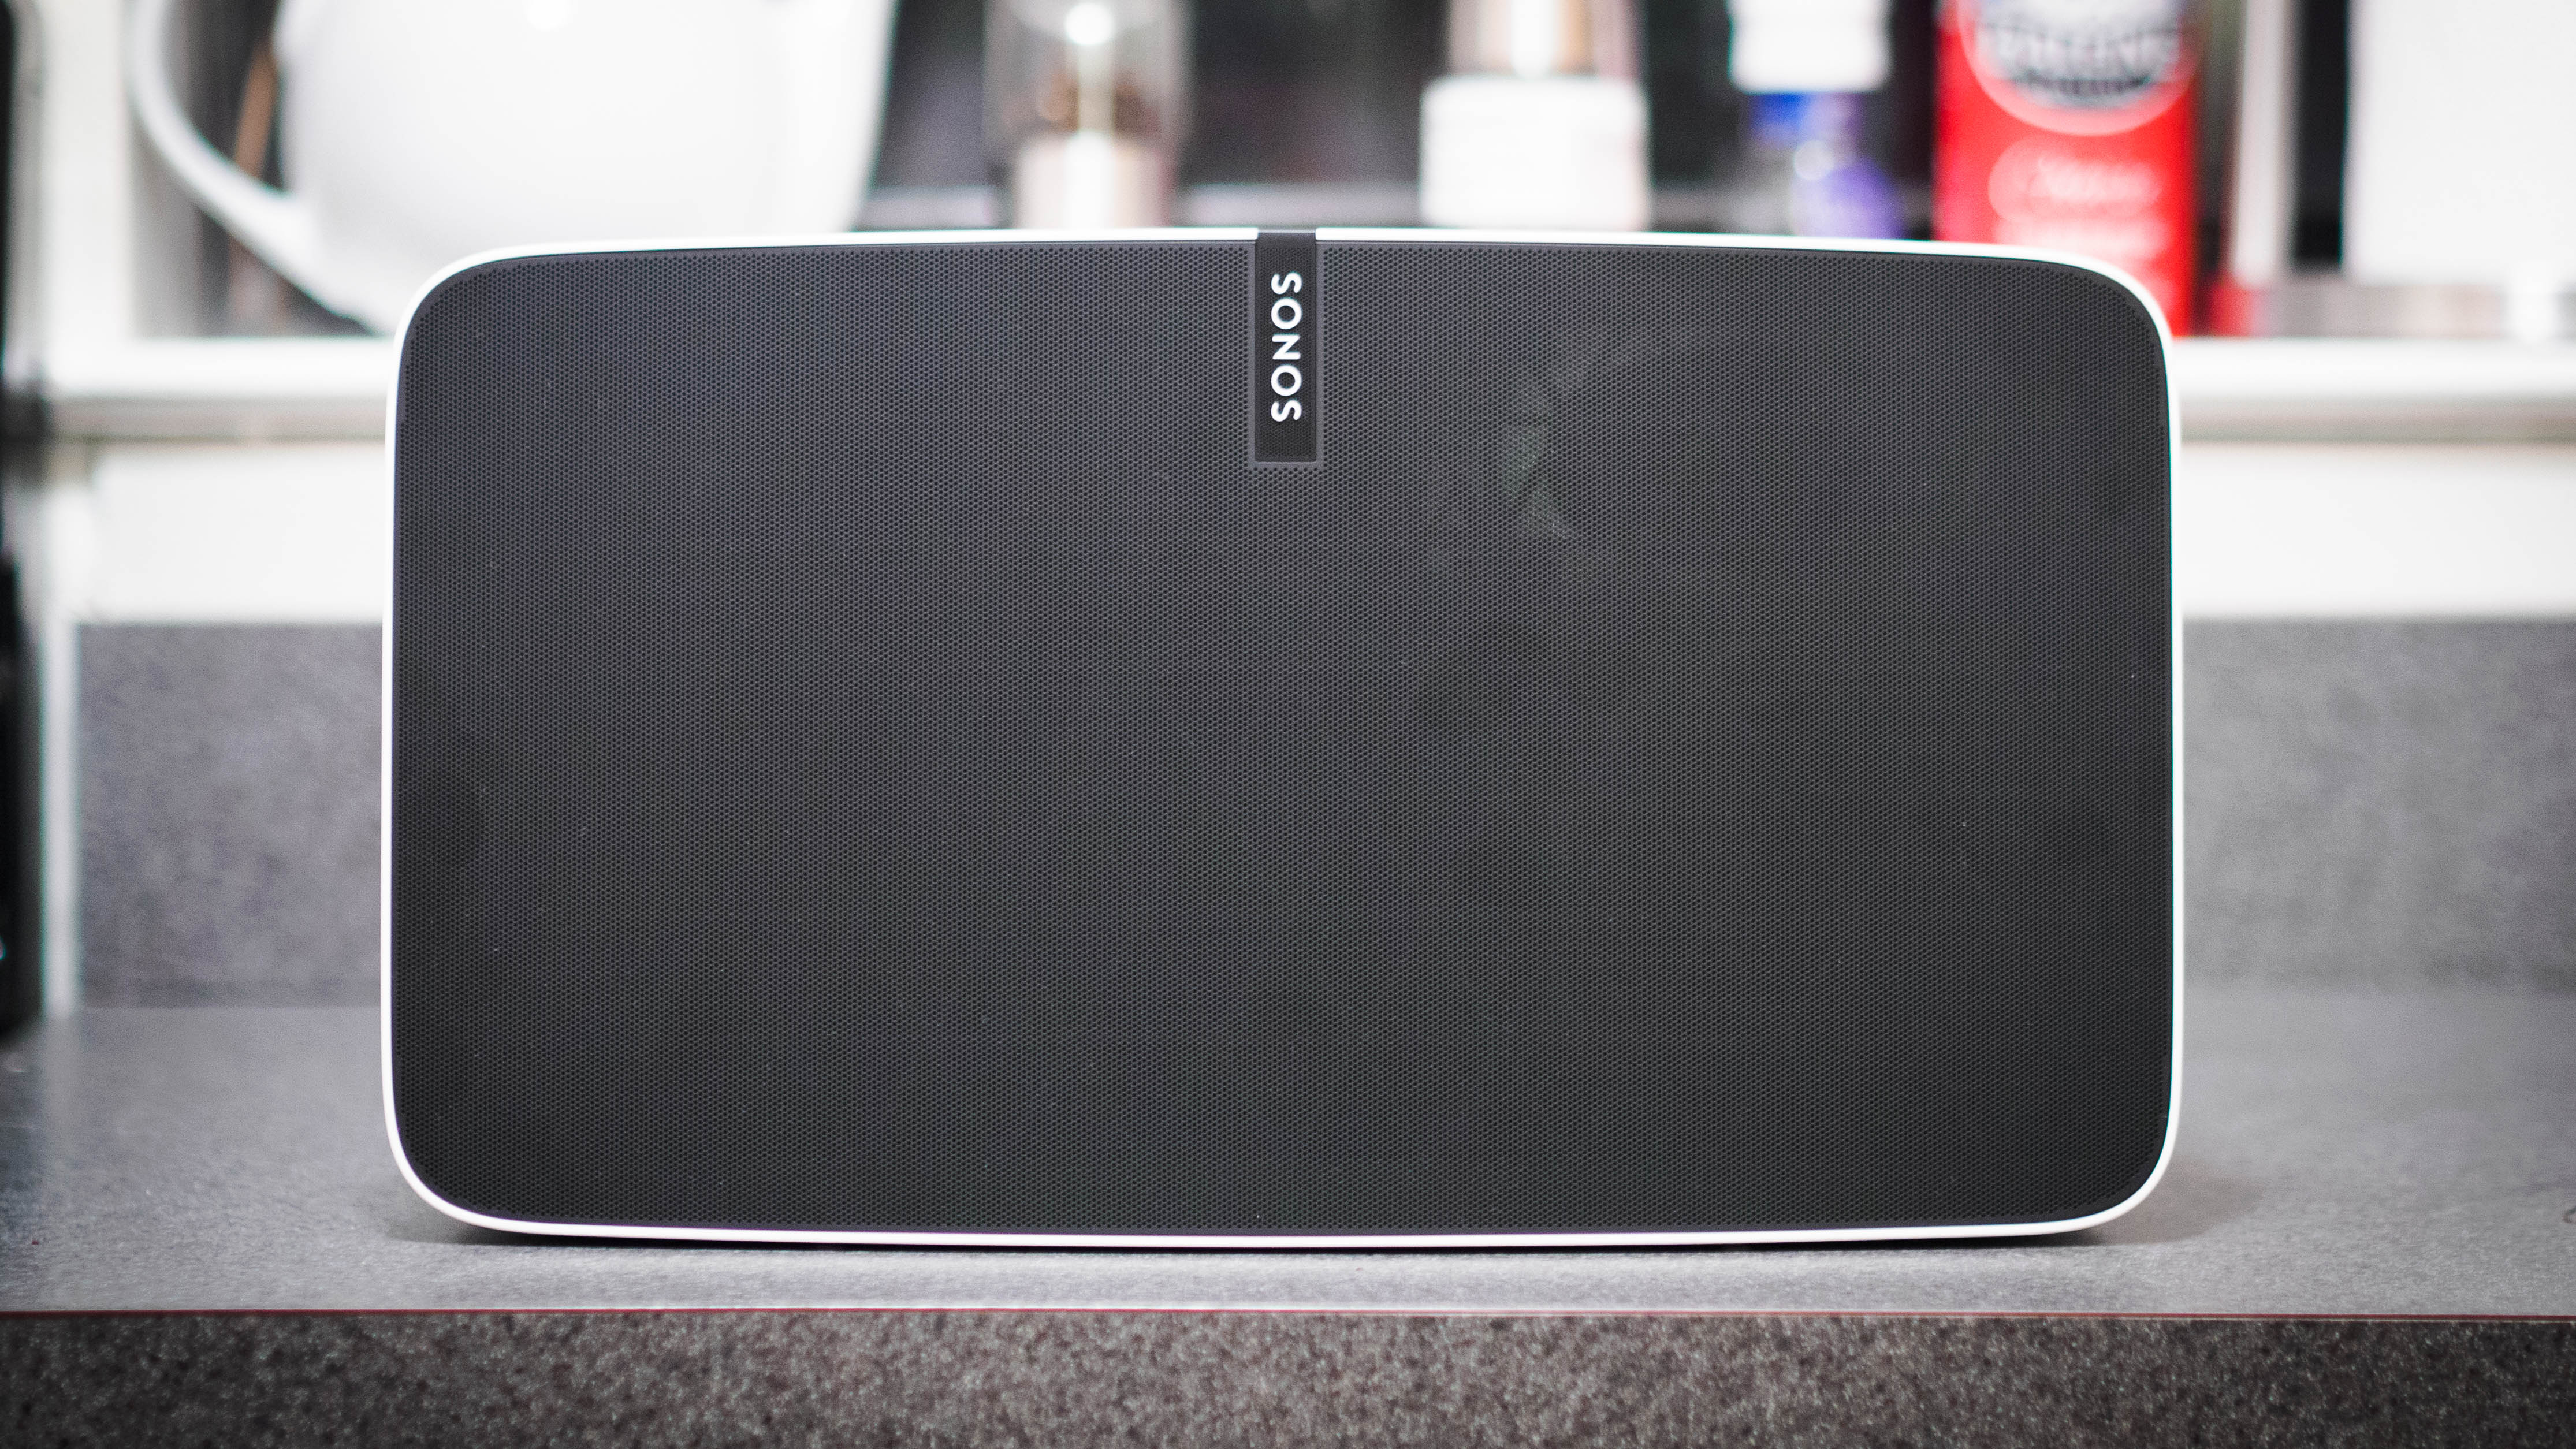 thespian klamre sig Permanent Sonos Play:5 review: Worth the money on audio quality alone